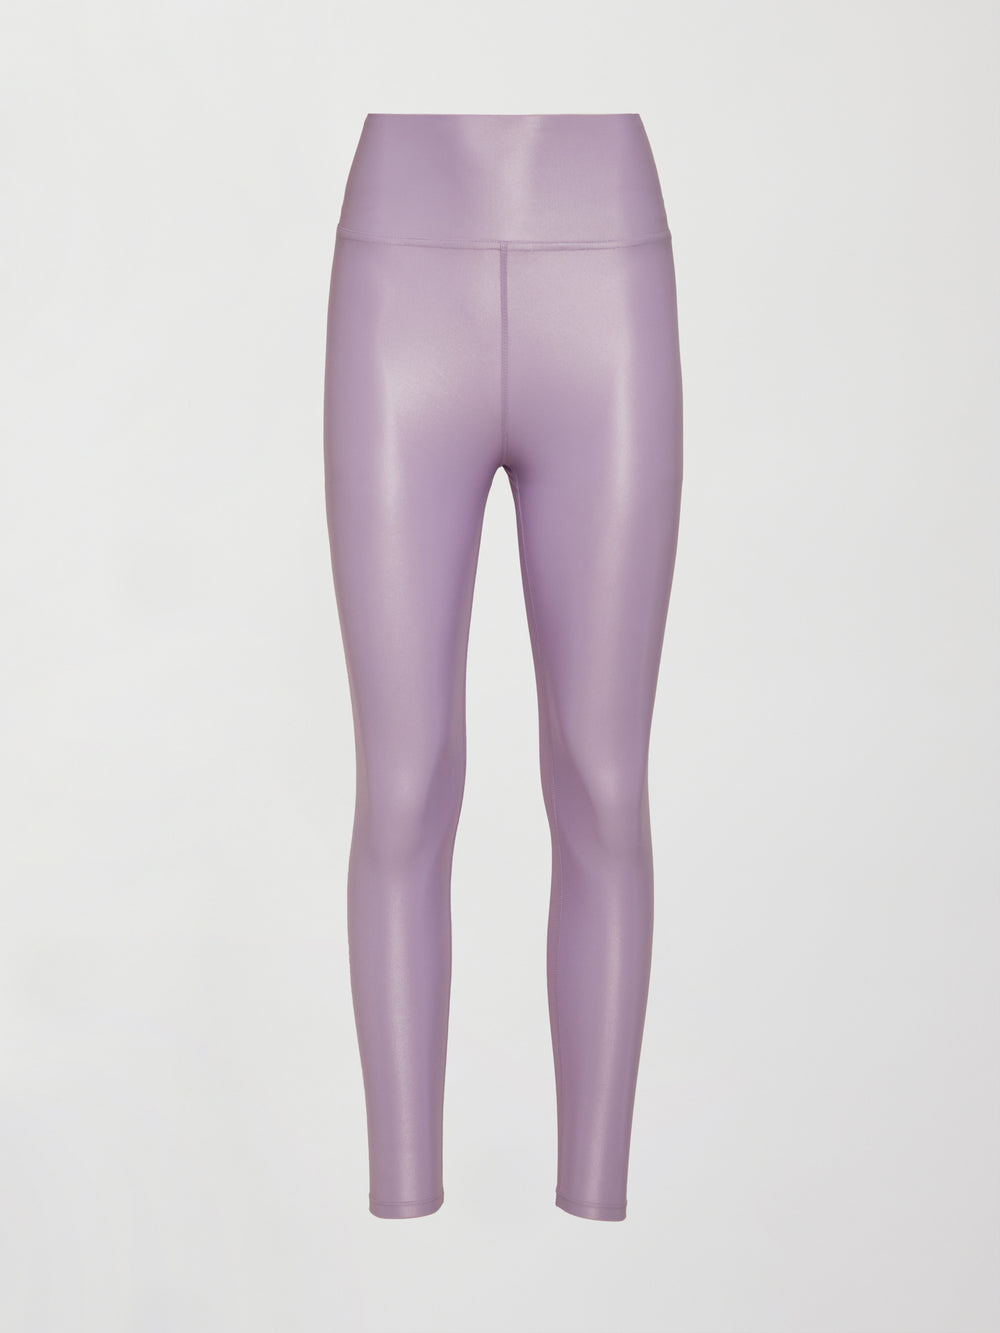 Carbon 38 Regular Rise 7/8 Legging in Takara Shine Green Size M - $65 (49%  Off Retail) New With Tags - From karen